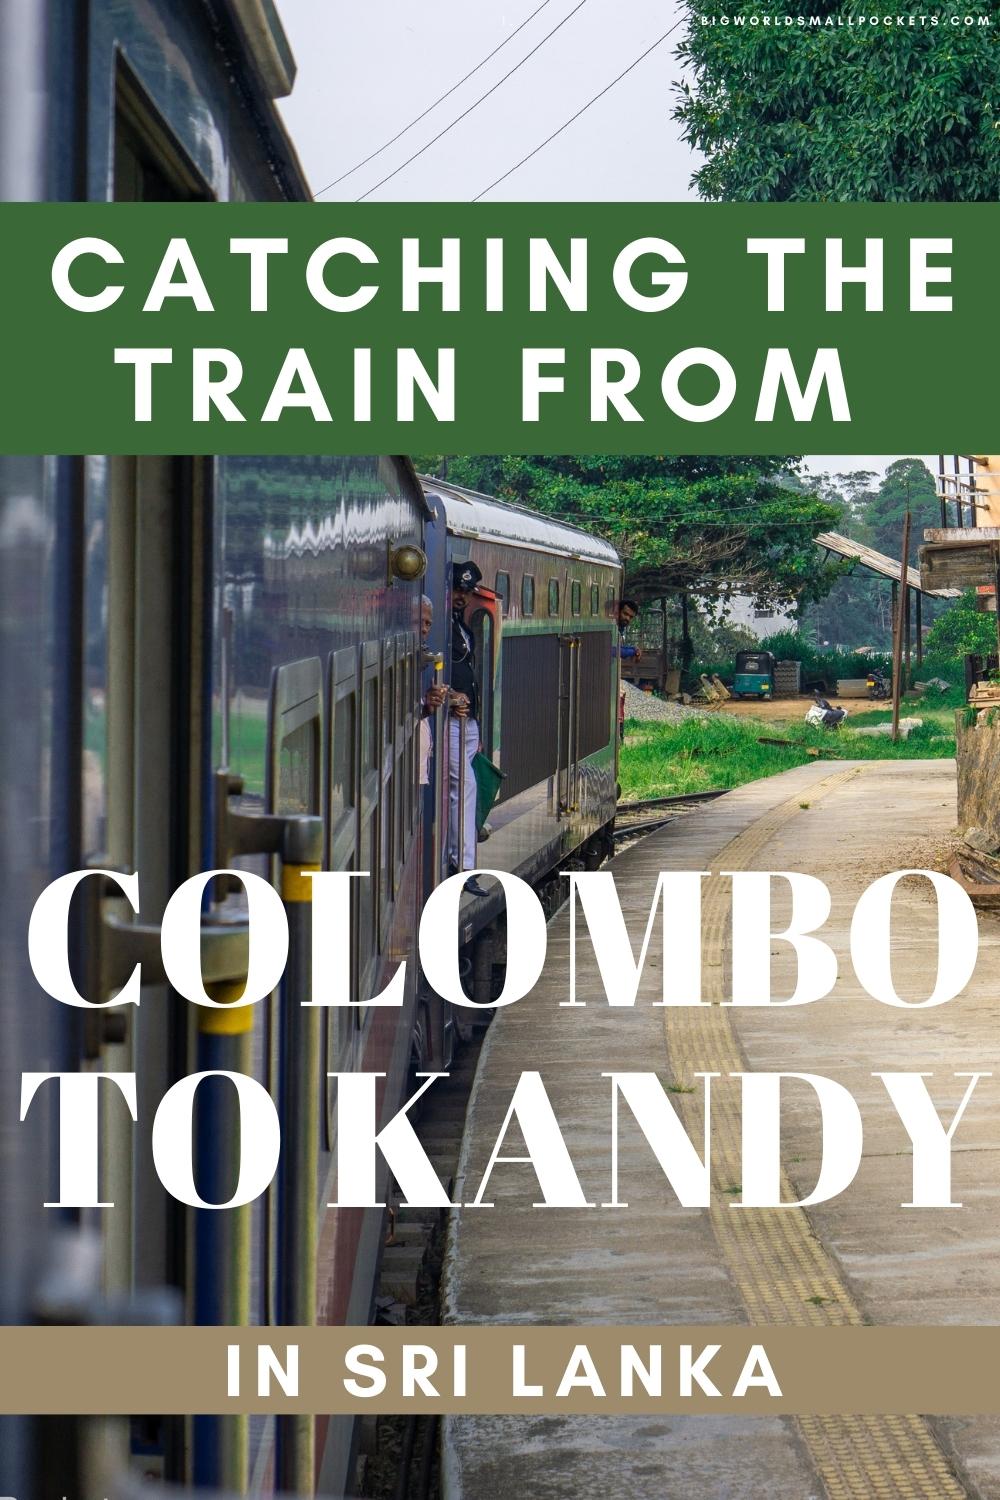 Travelling from Colombo to Kandy by Train - All You Need to Know